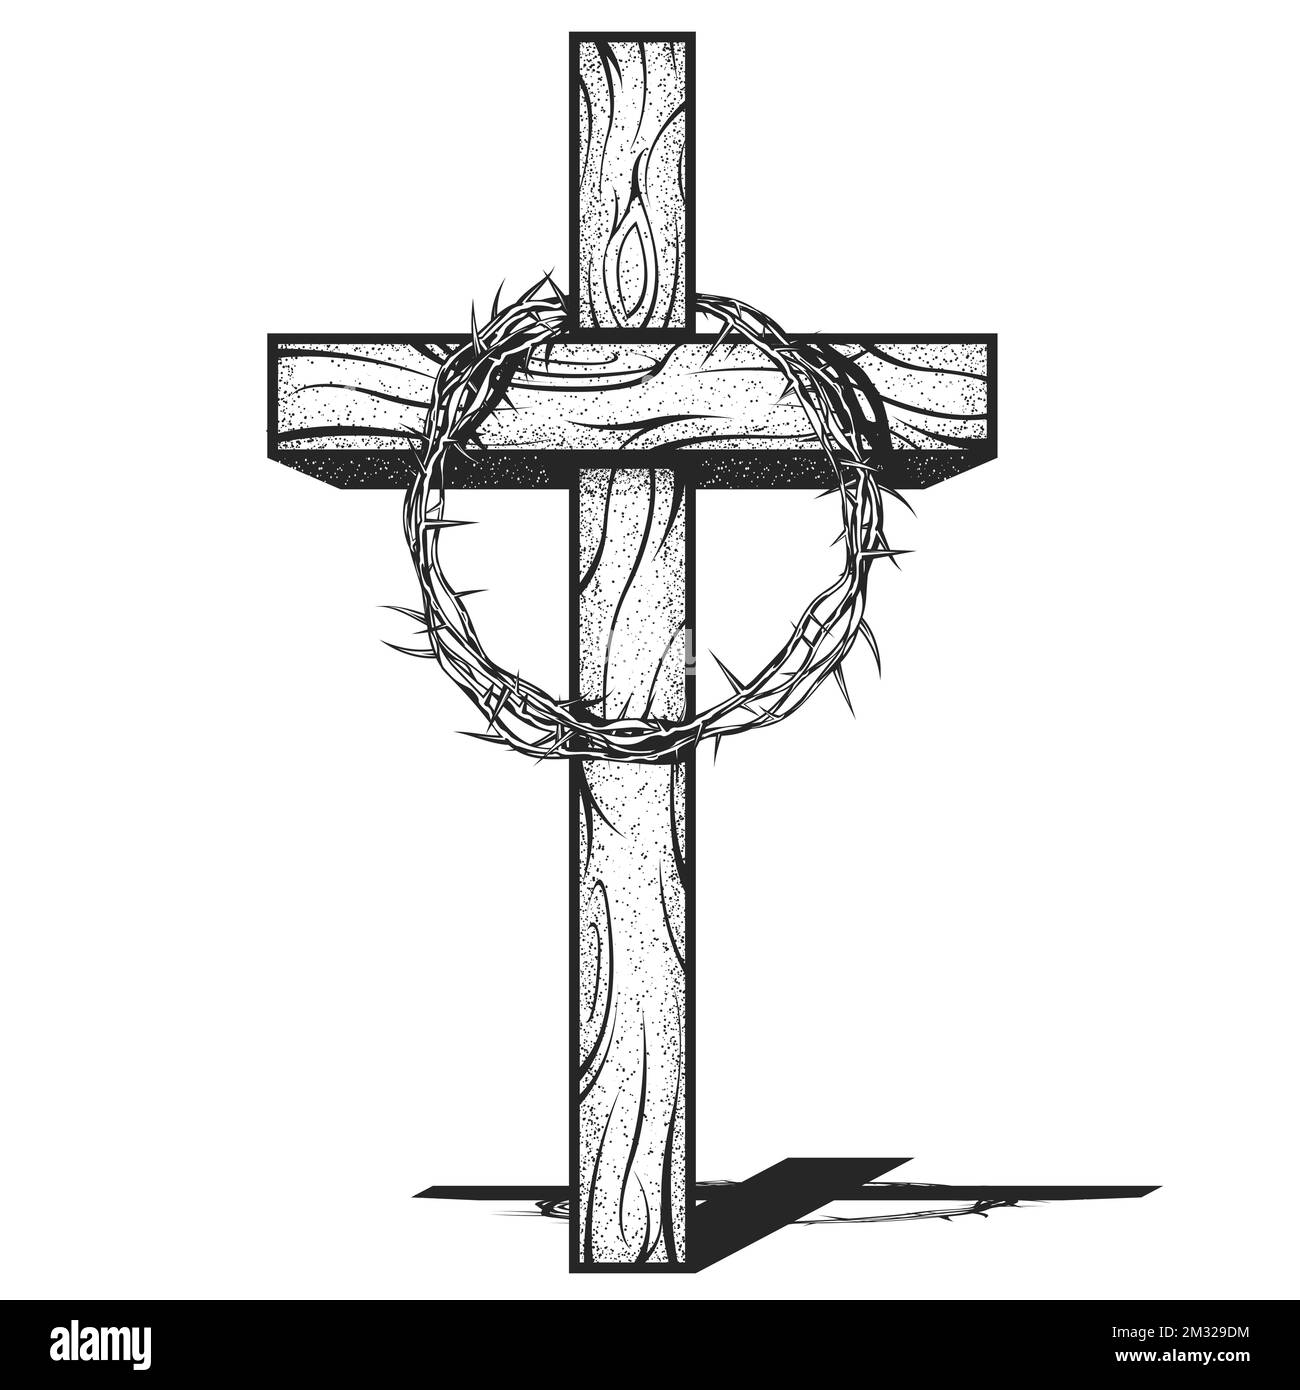 Crown of thorns of Jesus Christ on cross, crucifixion thorn or prickly wreath, religious symbol of Christianity, vector Stock Vector